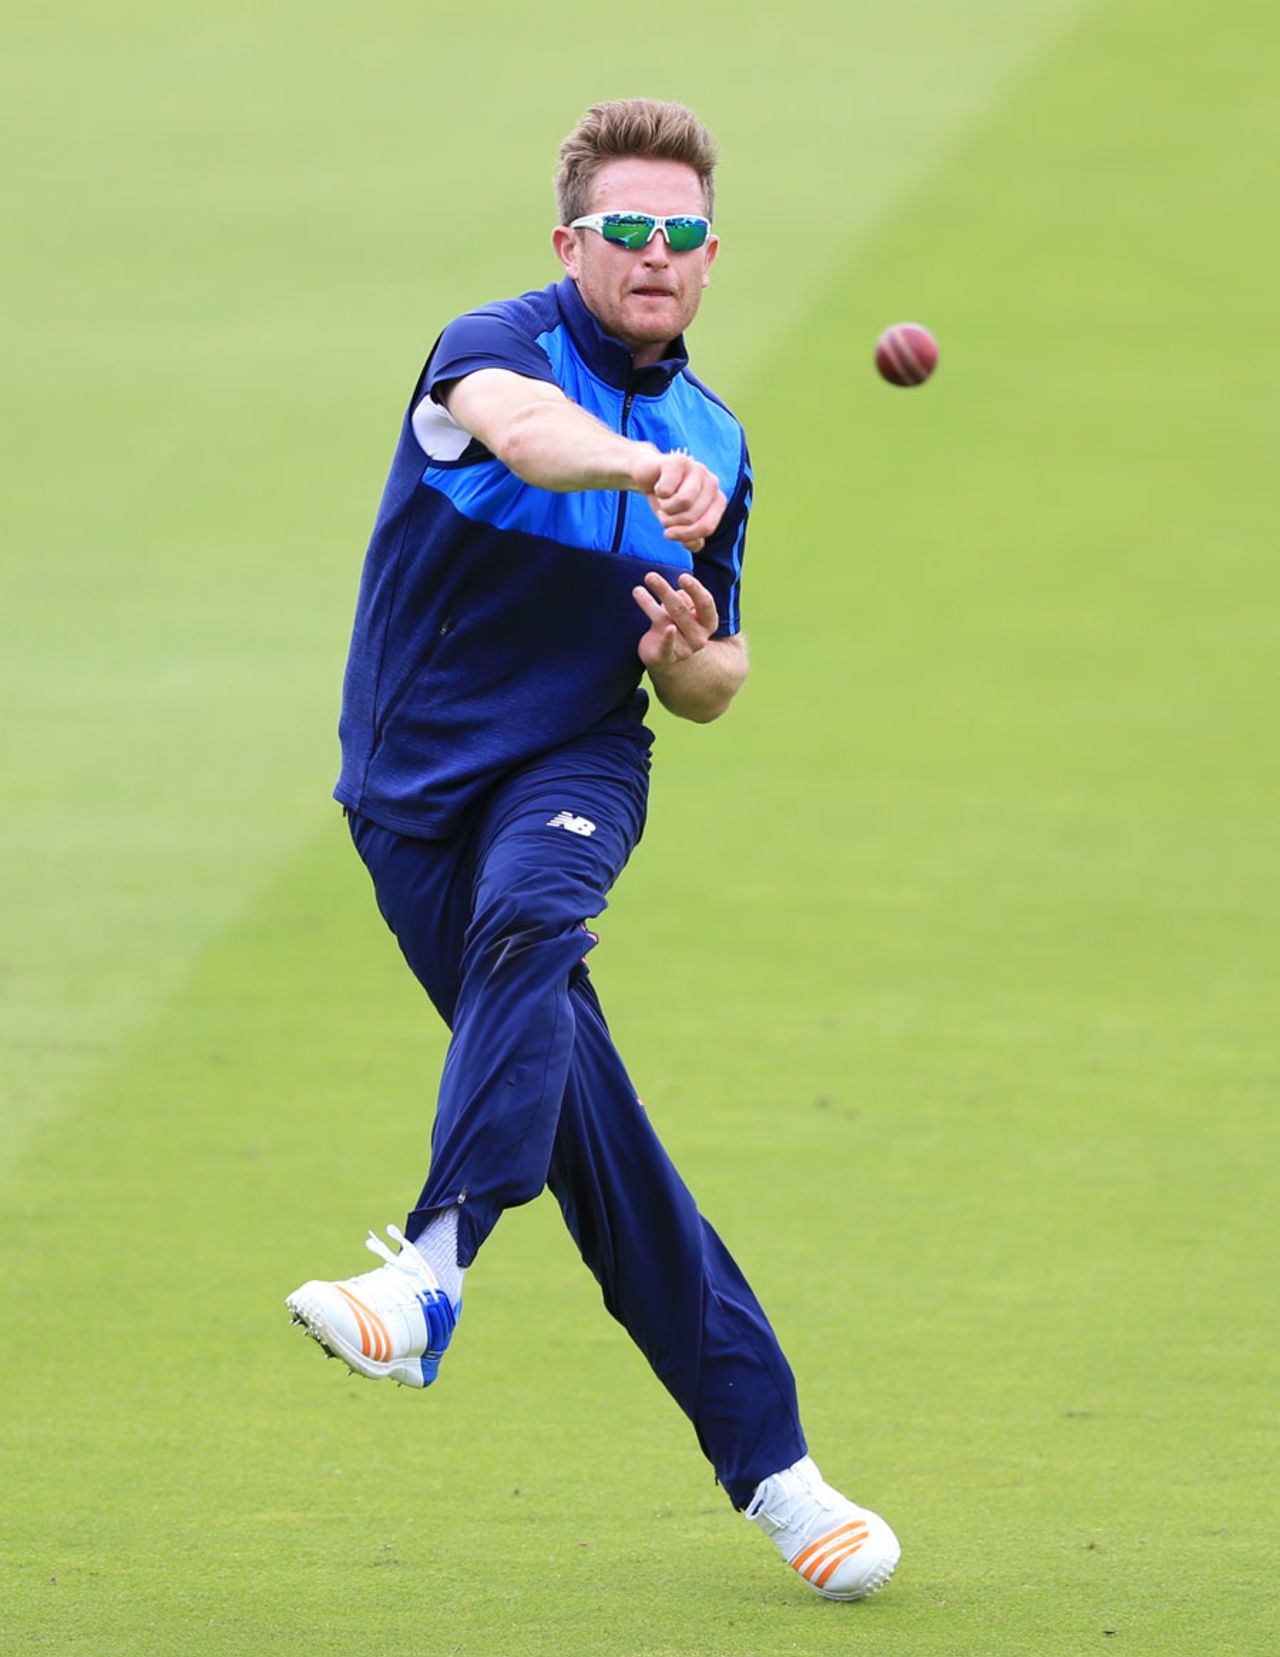 Liam Dawson takes part in a fielding drill, Lord's, July 4, 2017